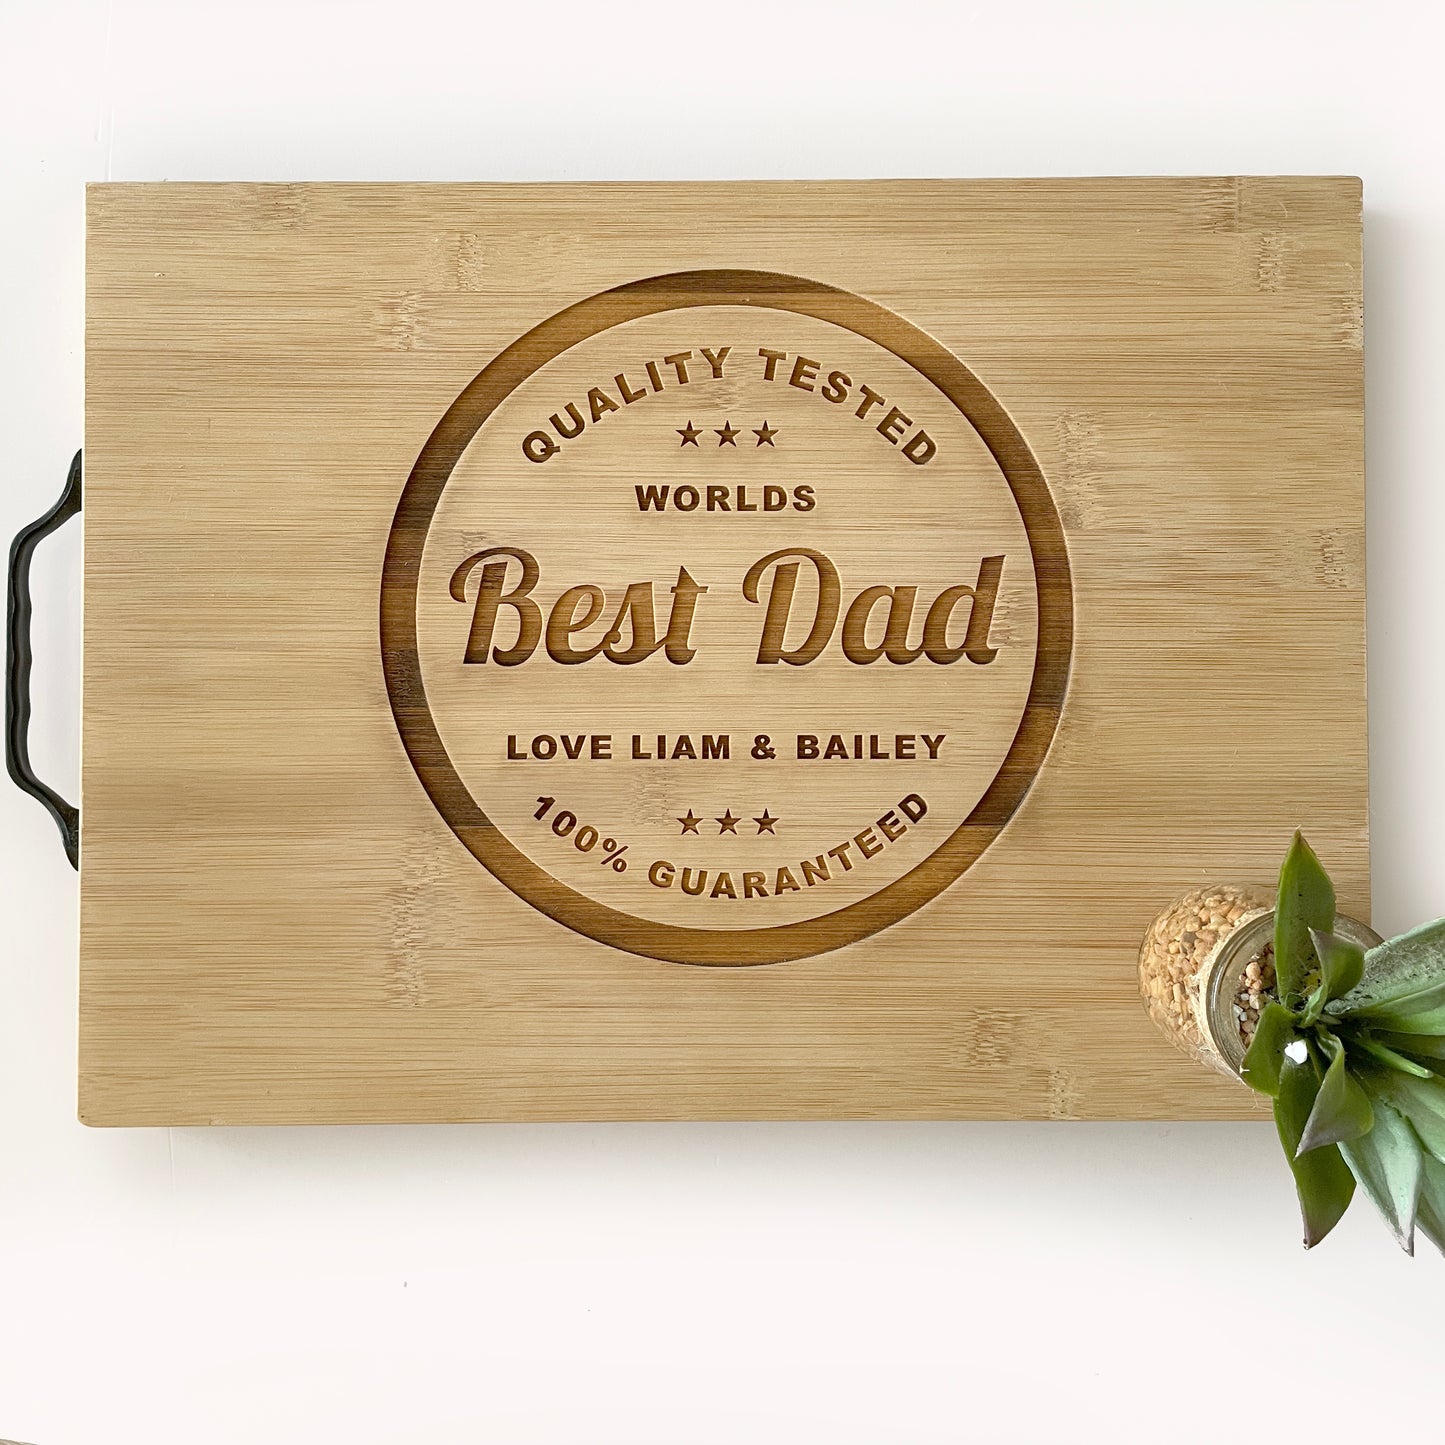 Best Dad or Grandpa personalised engraved cutting board